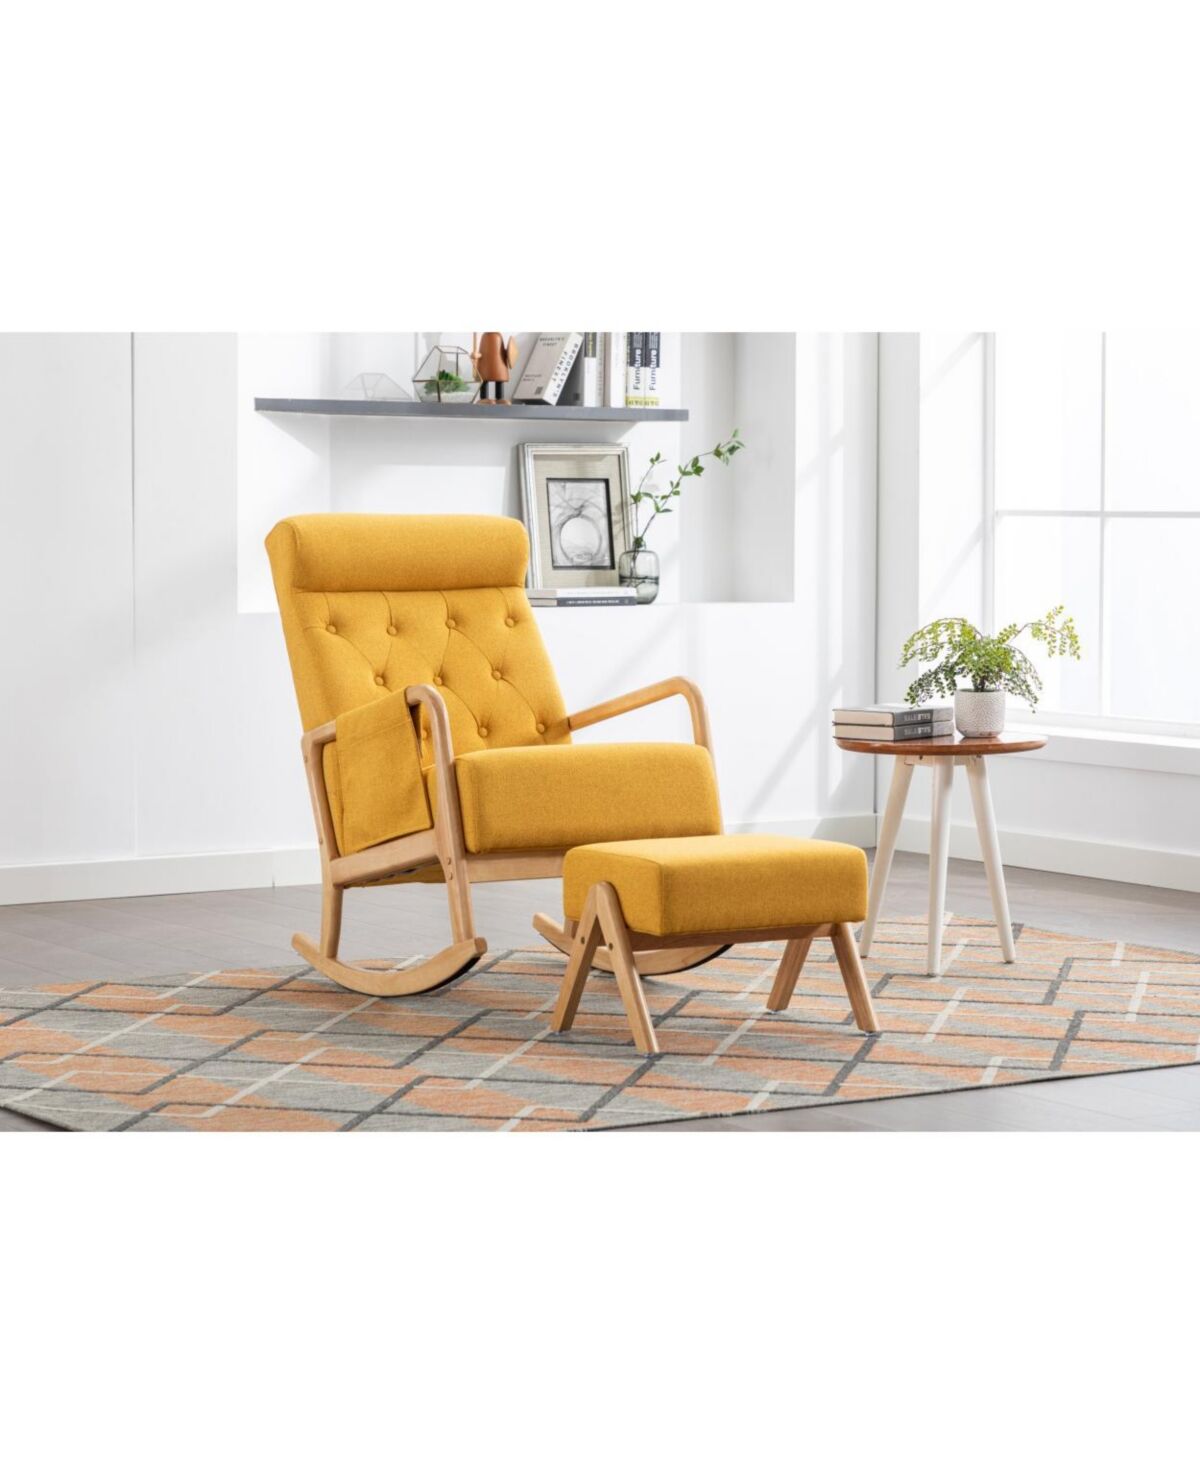 Simplie Fun Rocking Chair With Ottoman, Mid-Century Modern Upholstered Fabric Rocking Armchair, Rocking Chair Nursery with Thick Padded Cushion, High